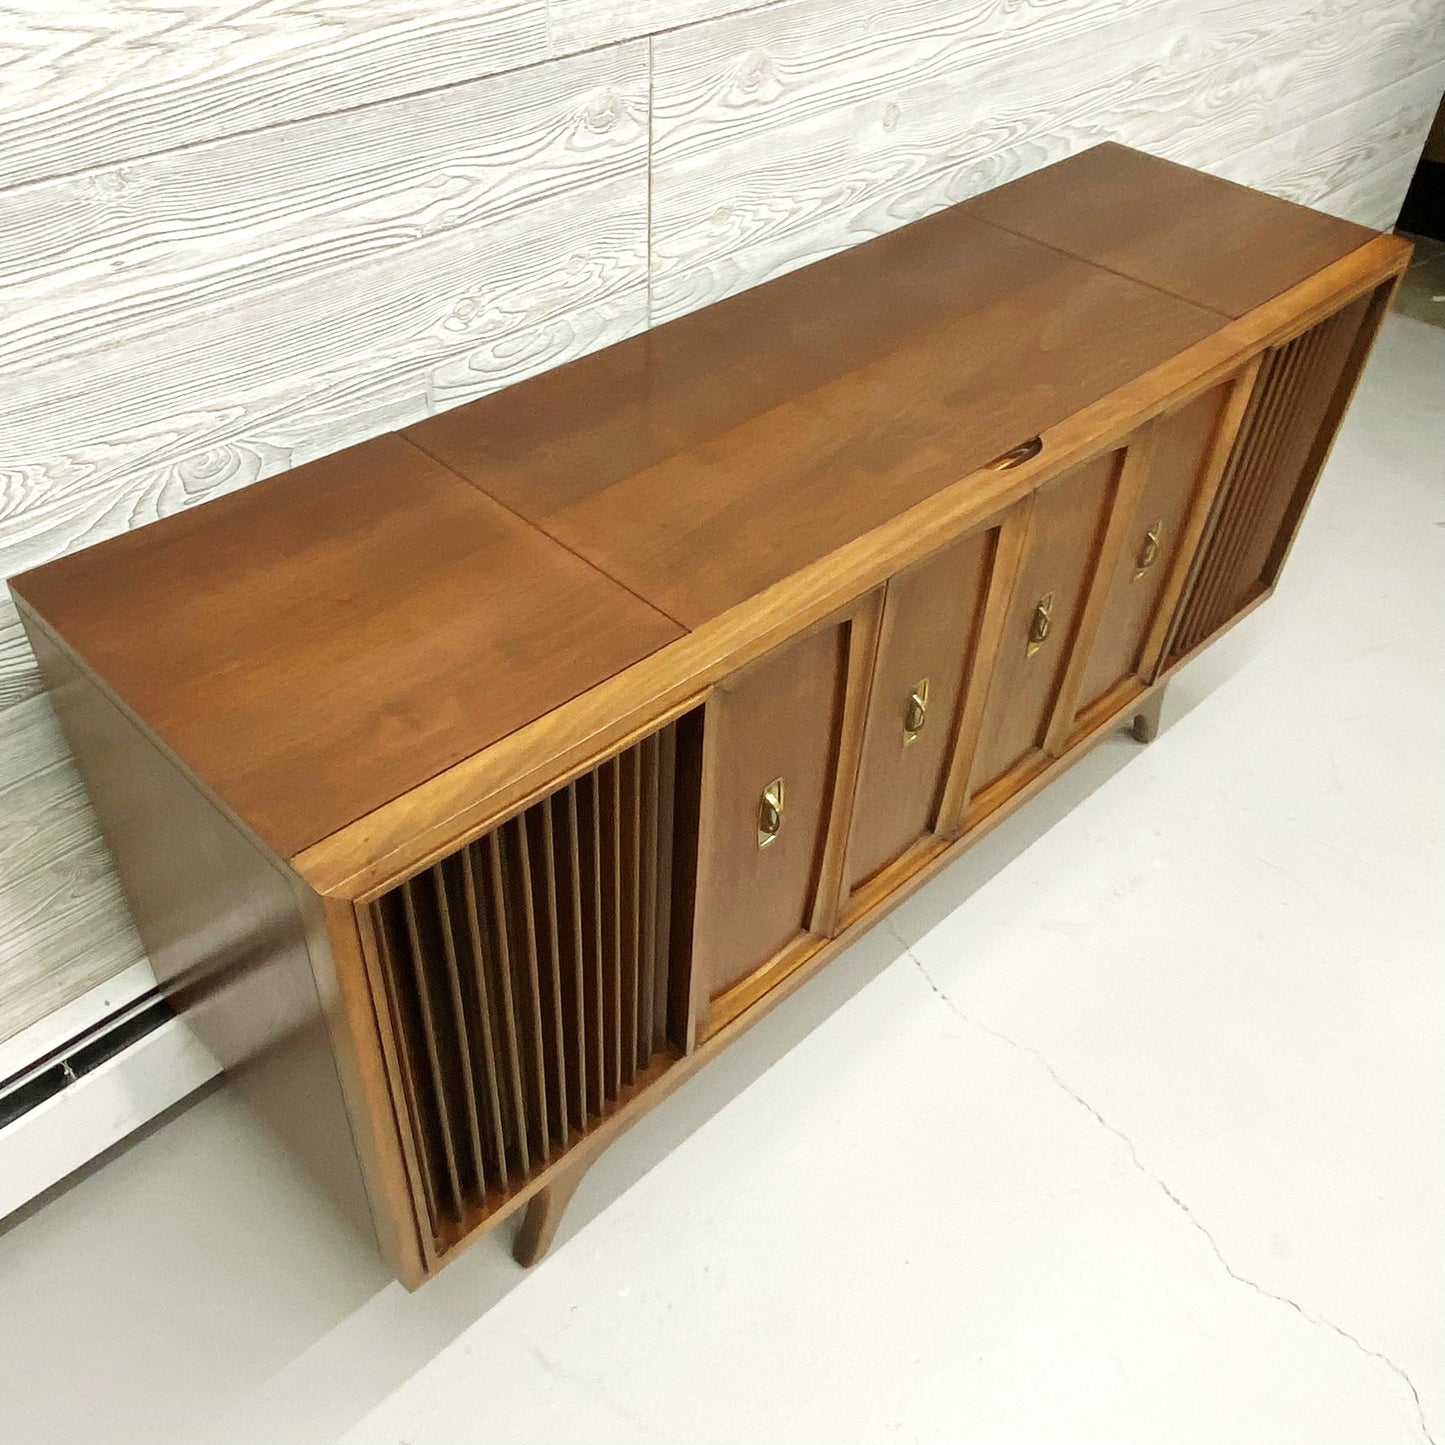 ZENITH Mid Century SOLID STATE Vintage Stereo Console Record Player Changer AM FM Bluetooth The Vintedge Co.